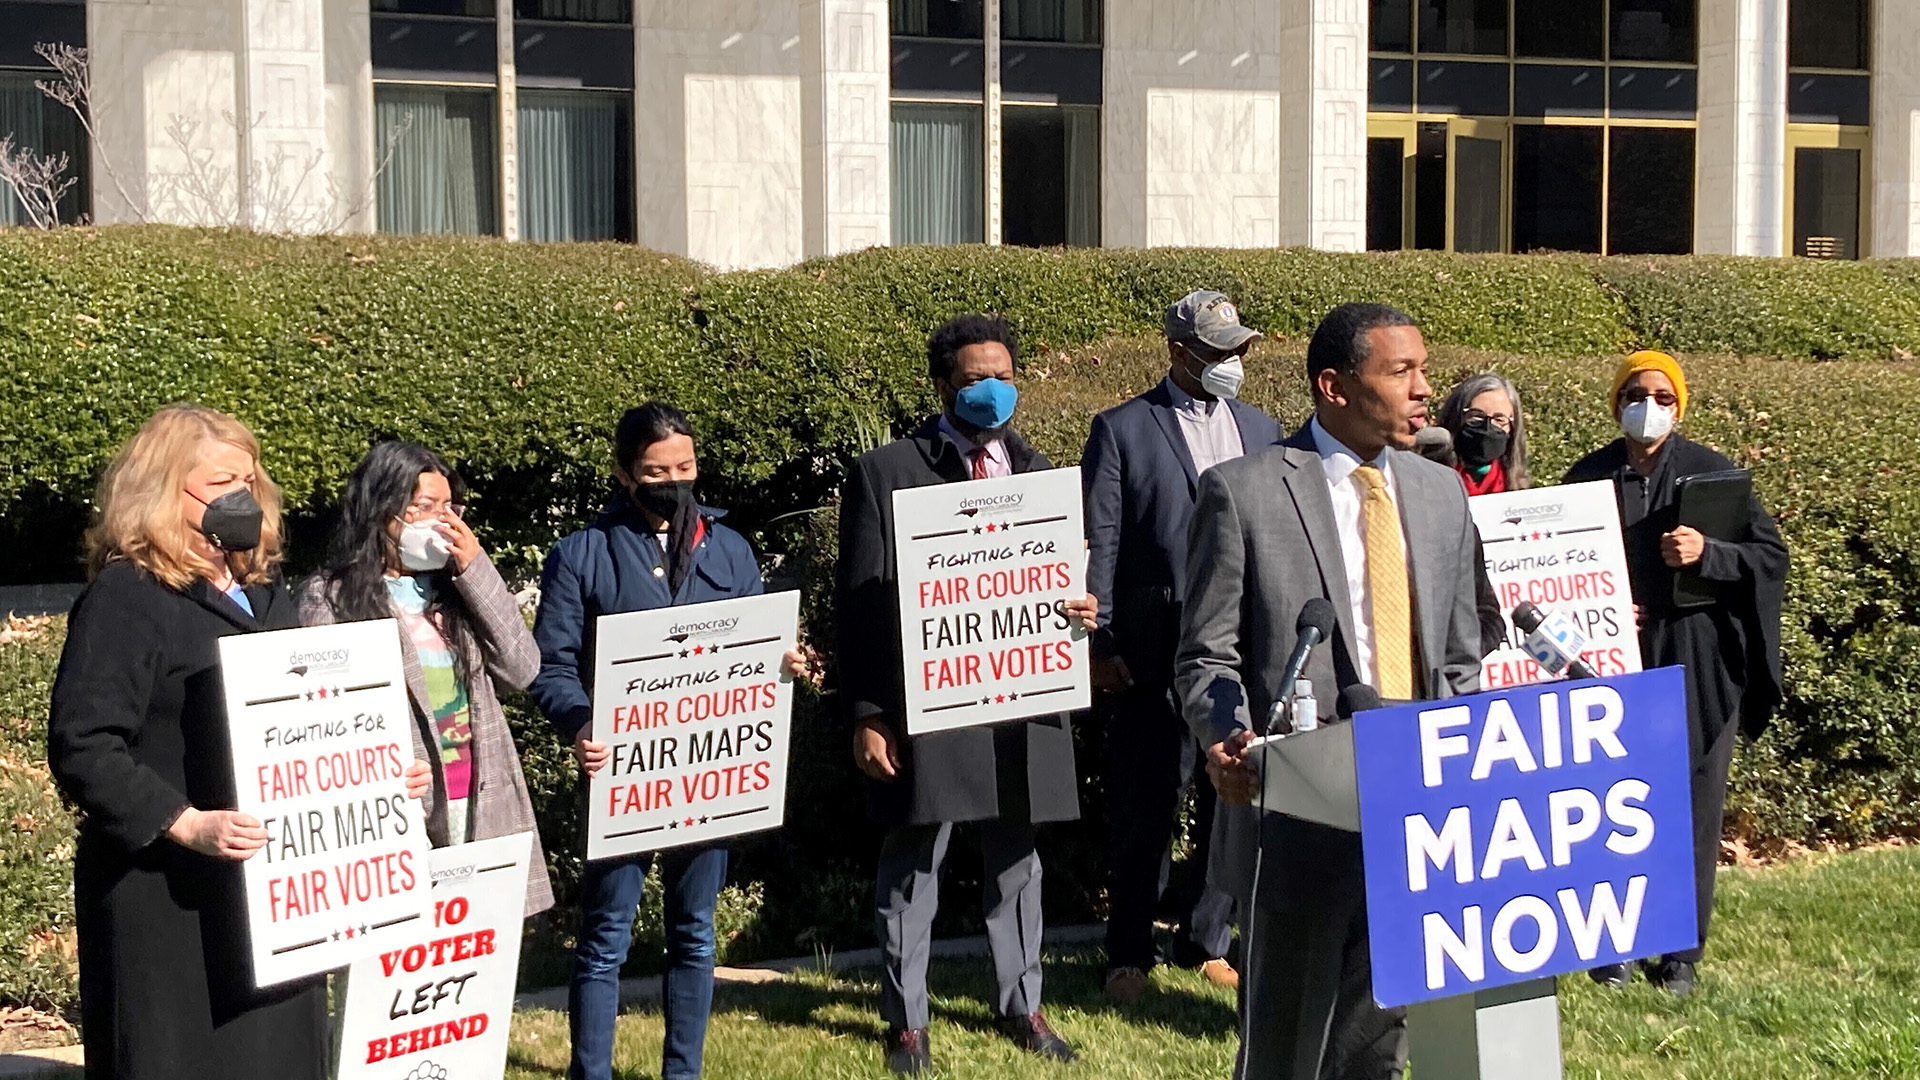 Reggie Weaver speaks while standing at a metal podium with multiple microphones and a sign reading "Fair Maps Now," with multiple other people standing behind him holding printed signs reading "Fighting for Fair Courts, Fair Maps, Fair Votes," with a row of hedges and a building in the background.